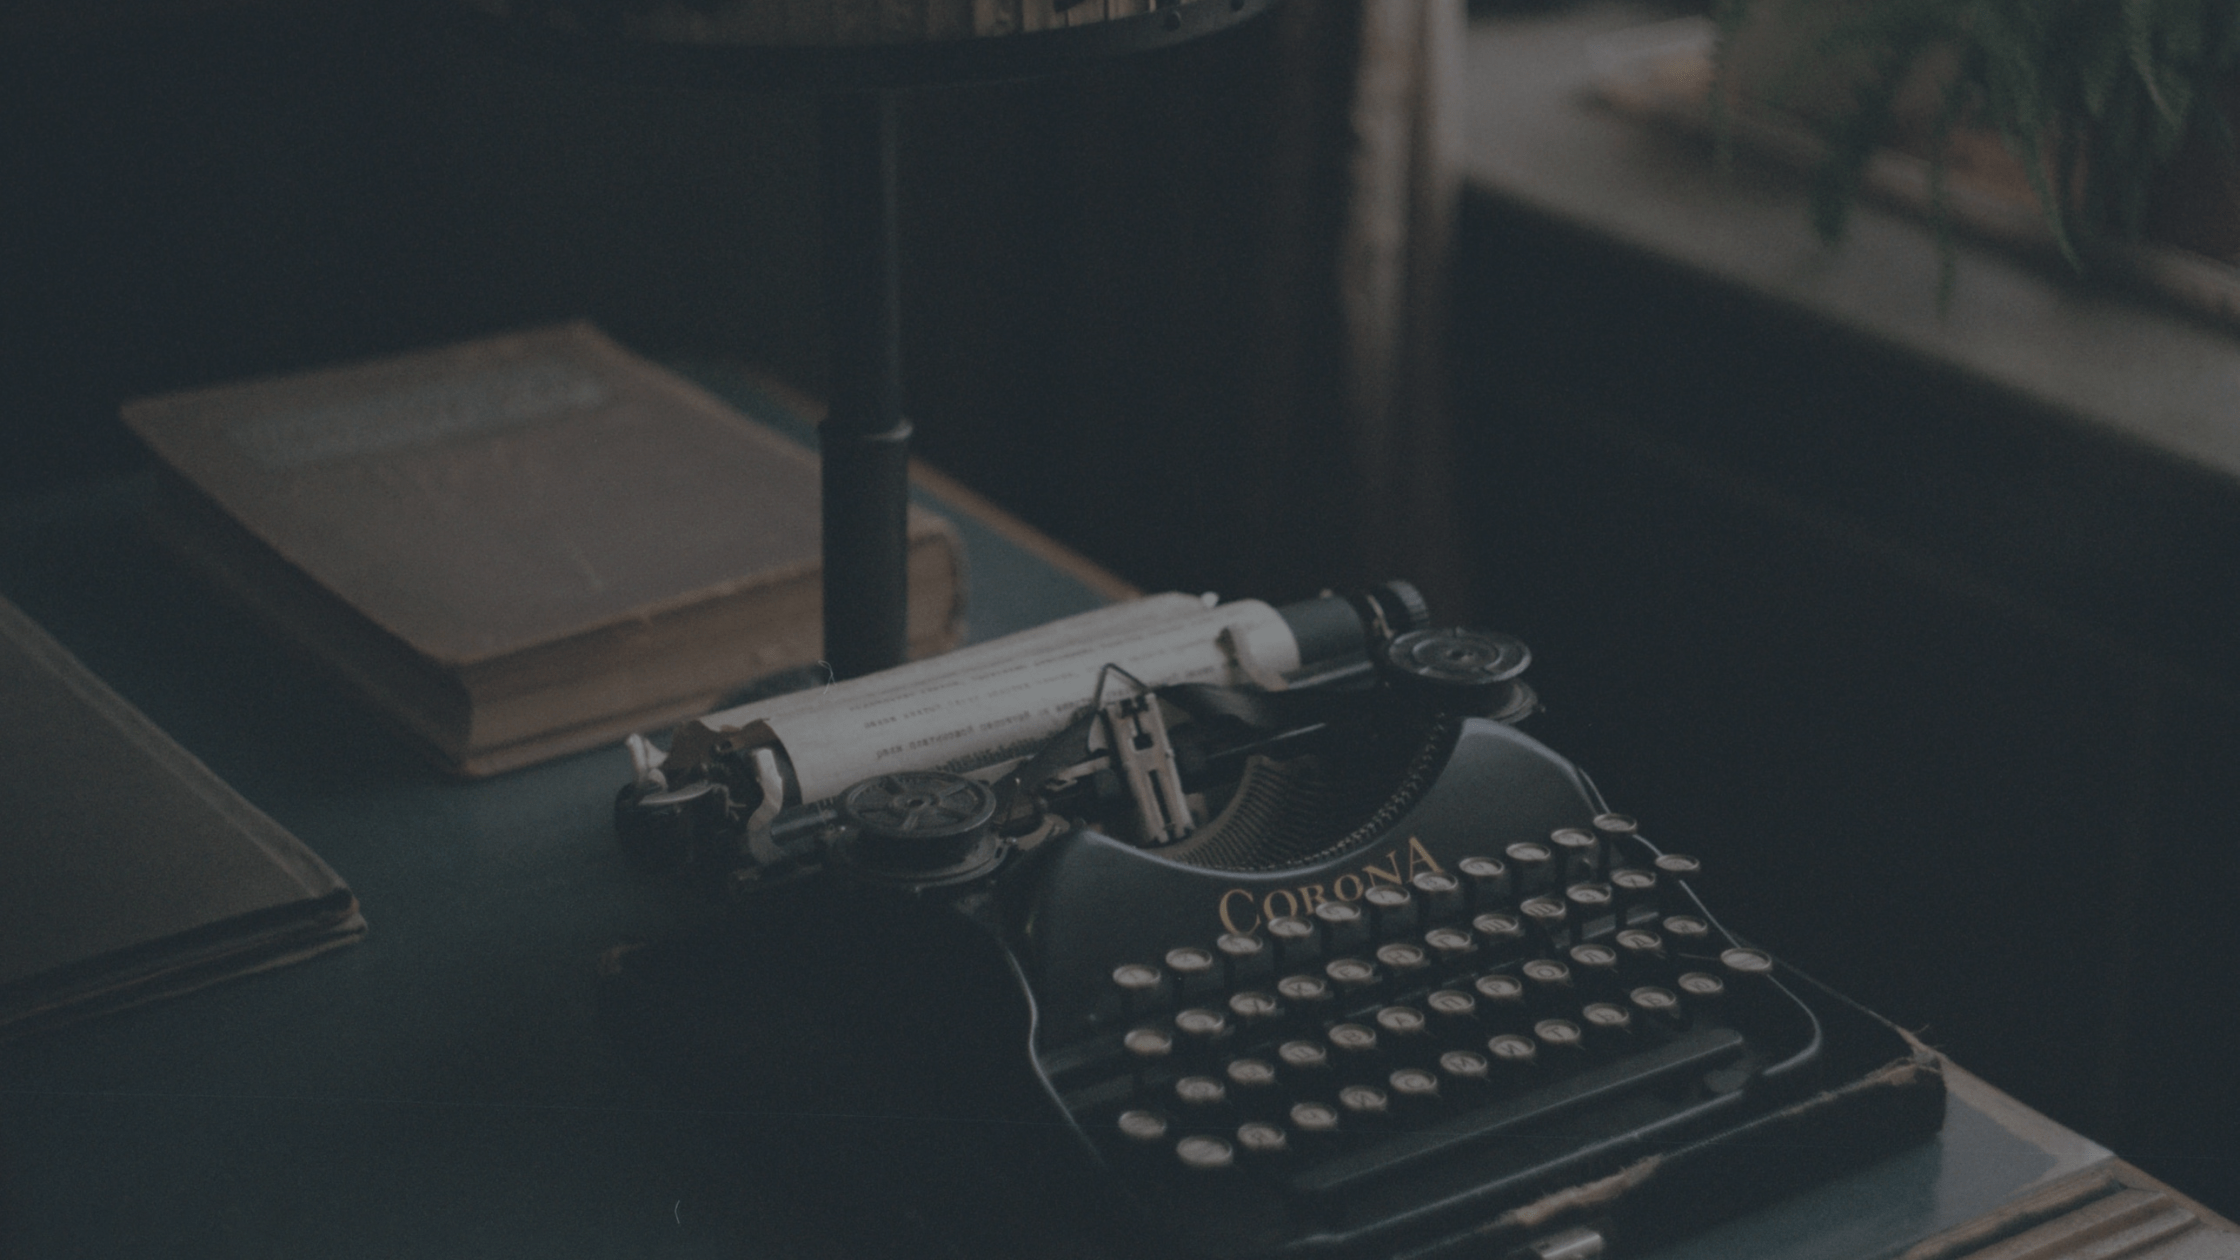 Typewriter for friendly SEO friendly content.